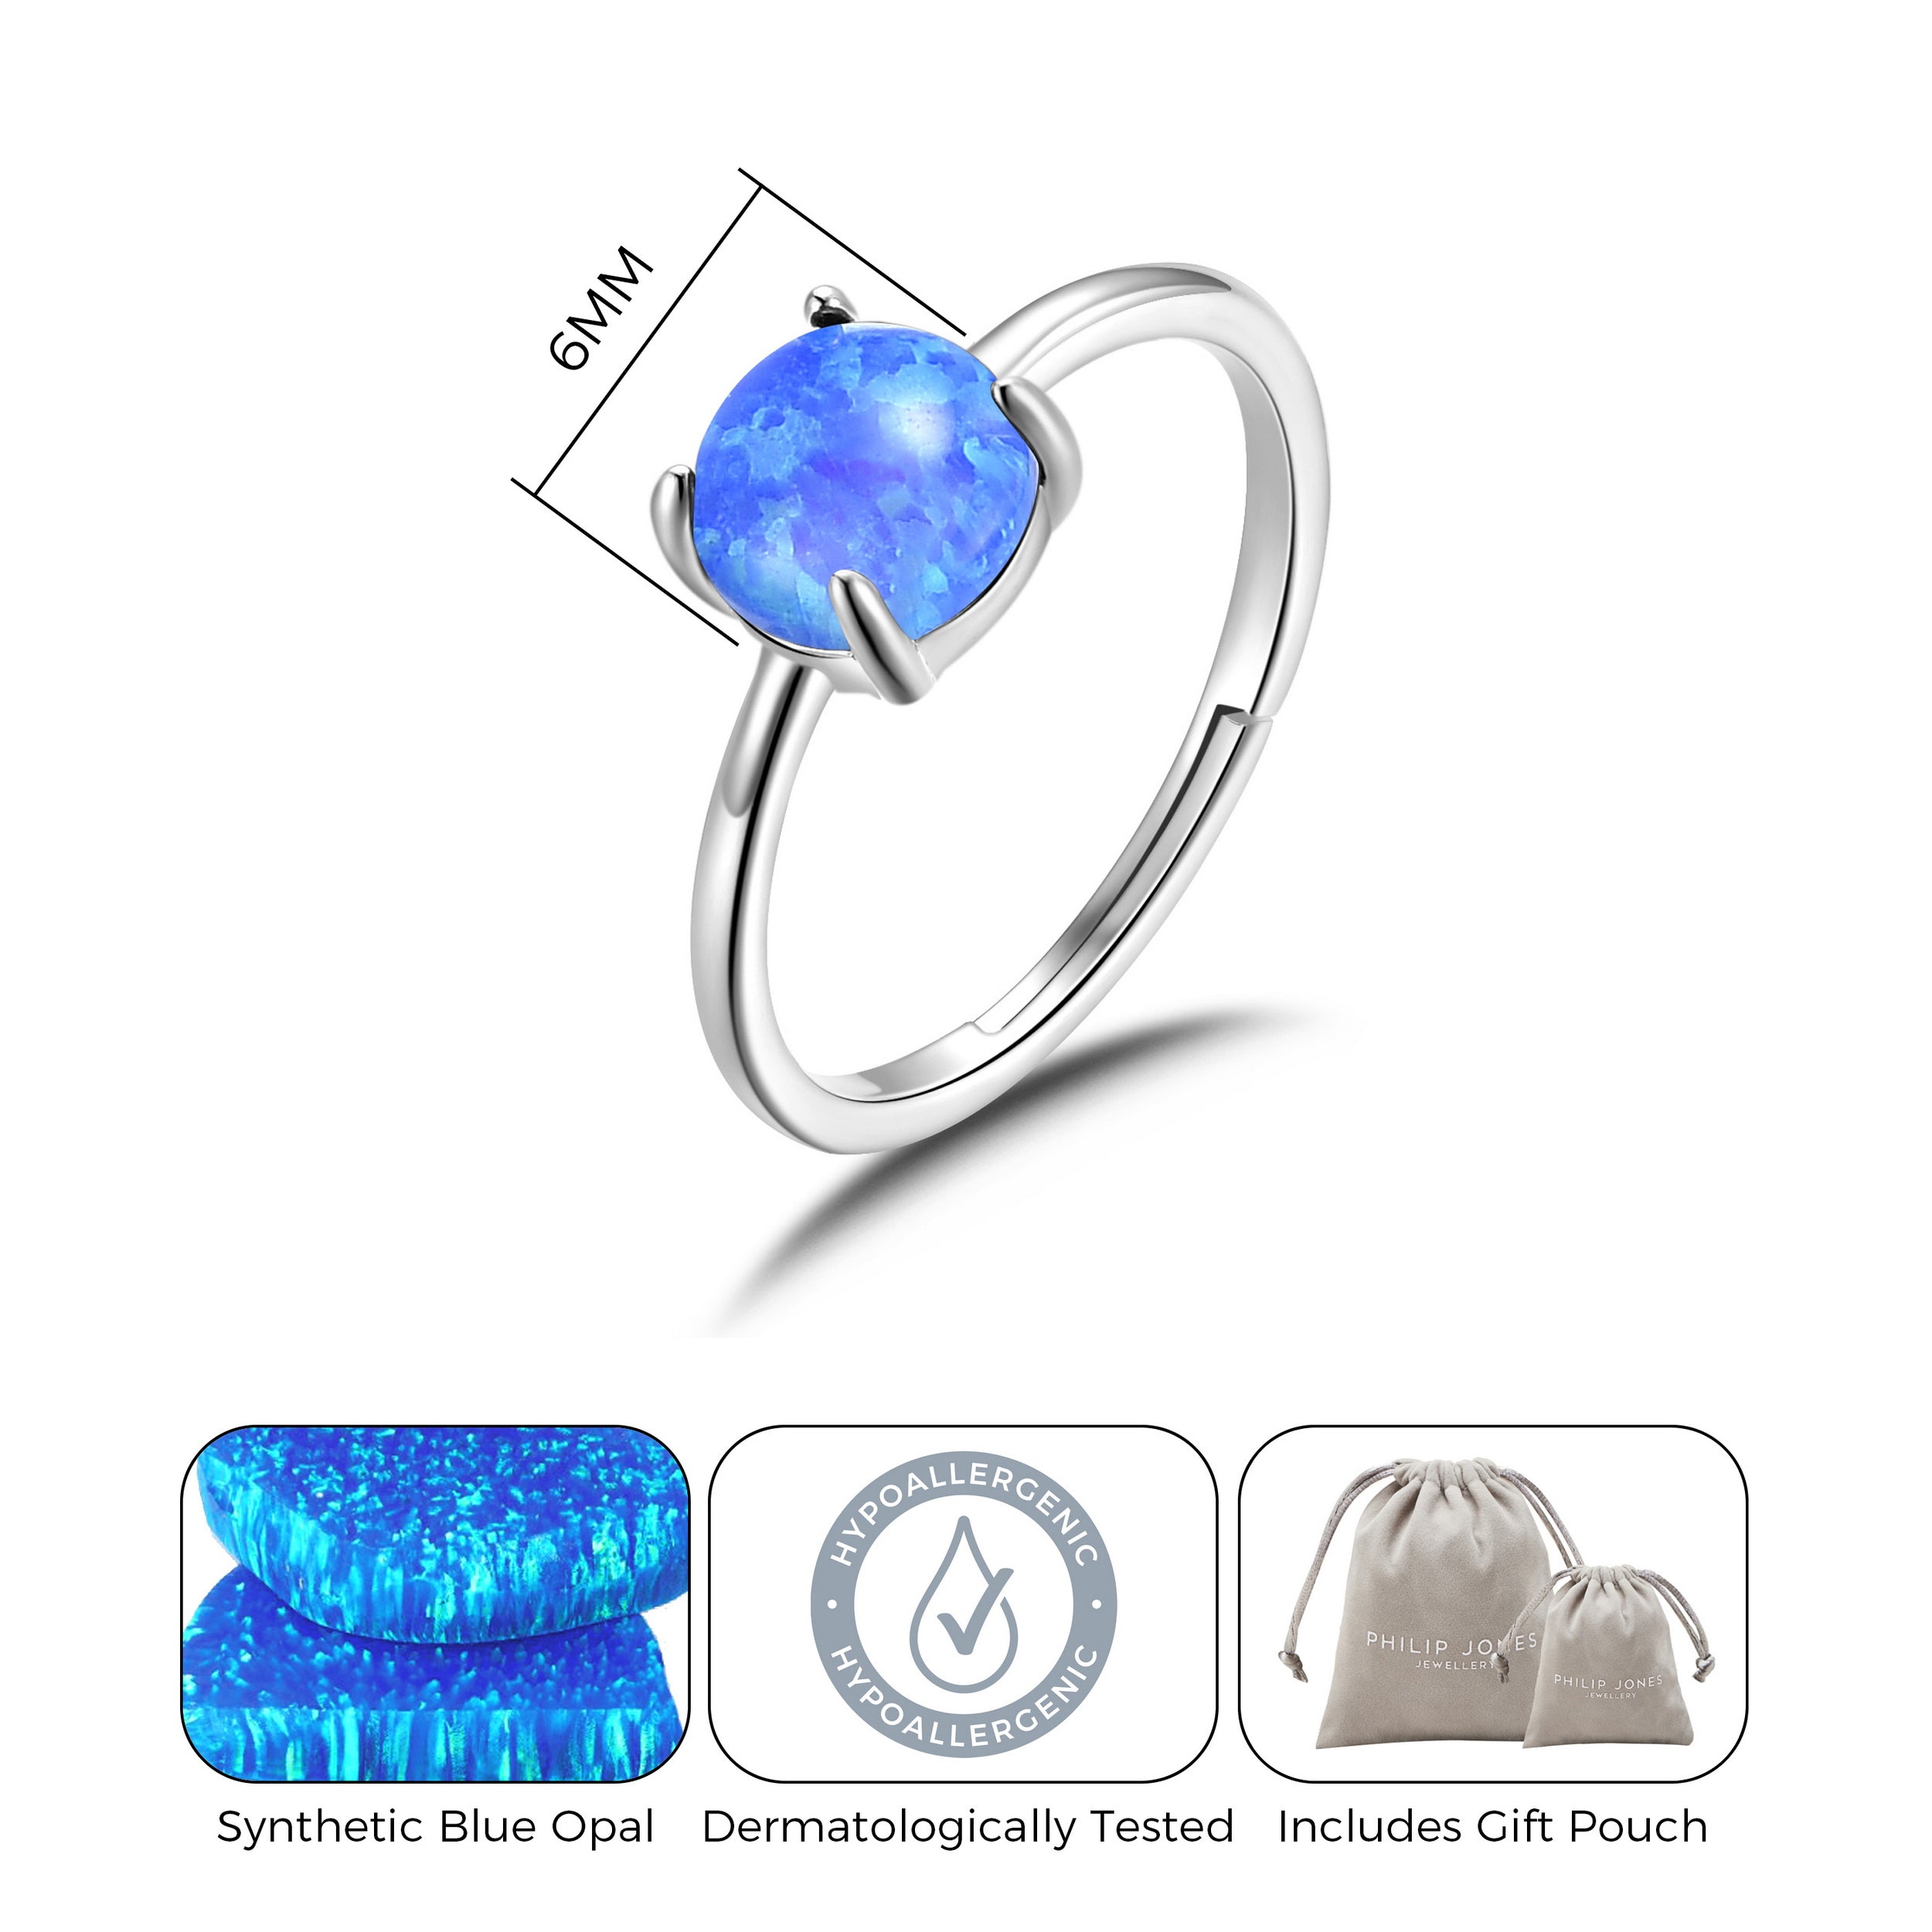 Synthetic Blue Opal Adjustable Ring with Quote Card